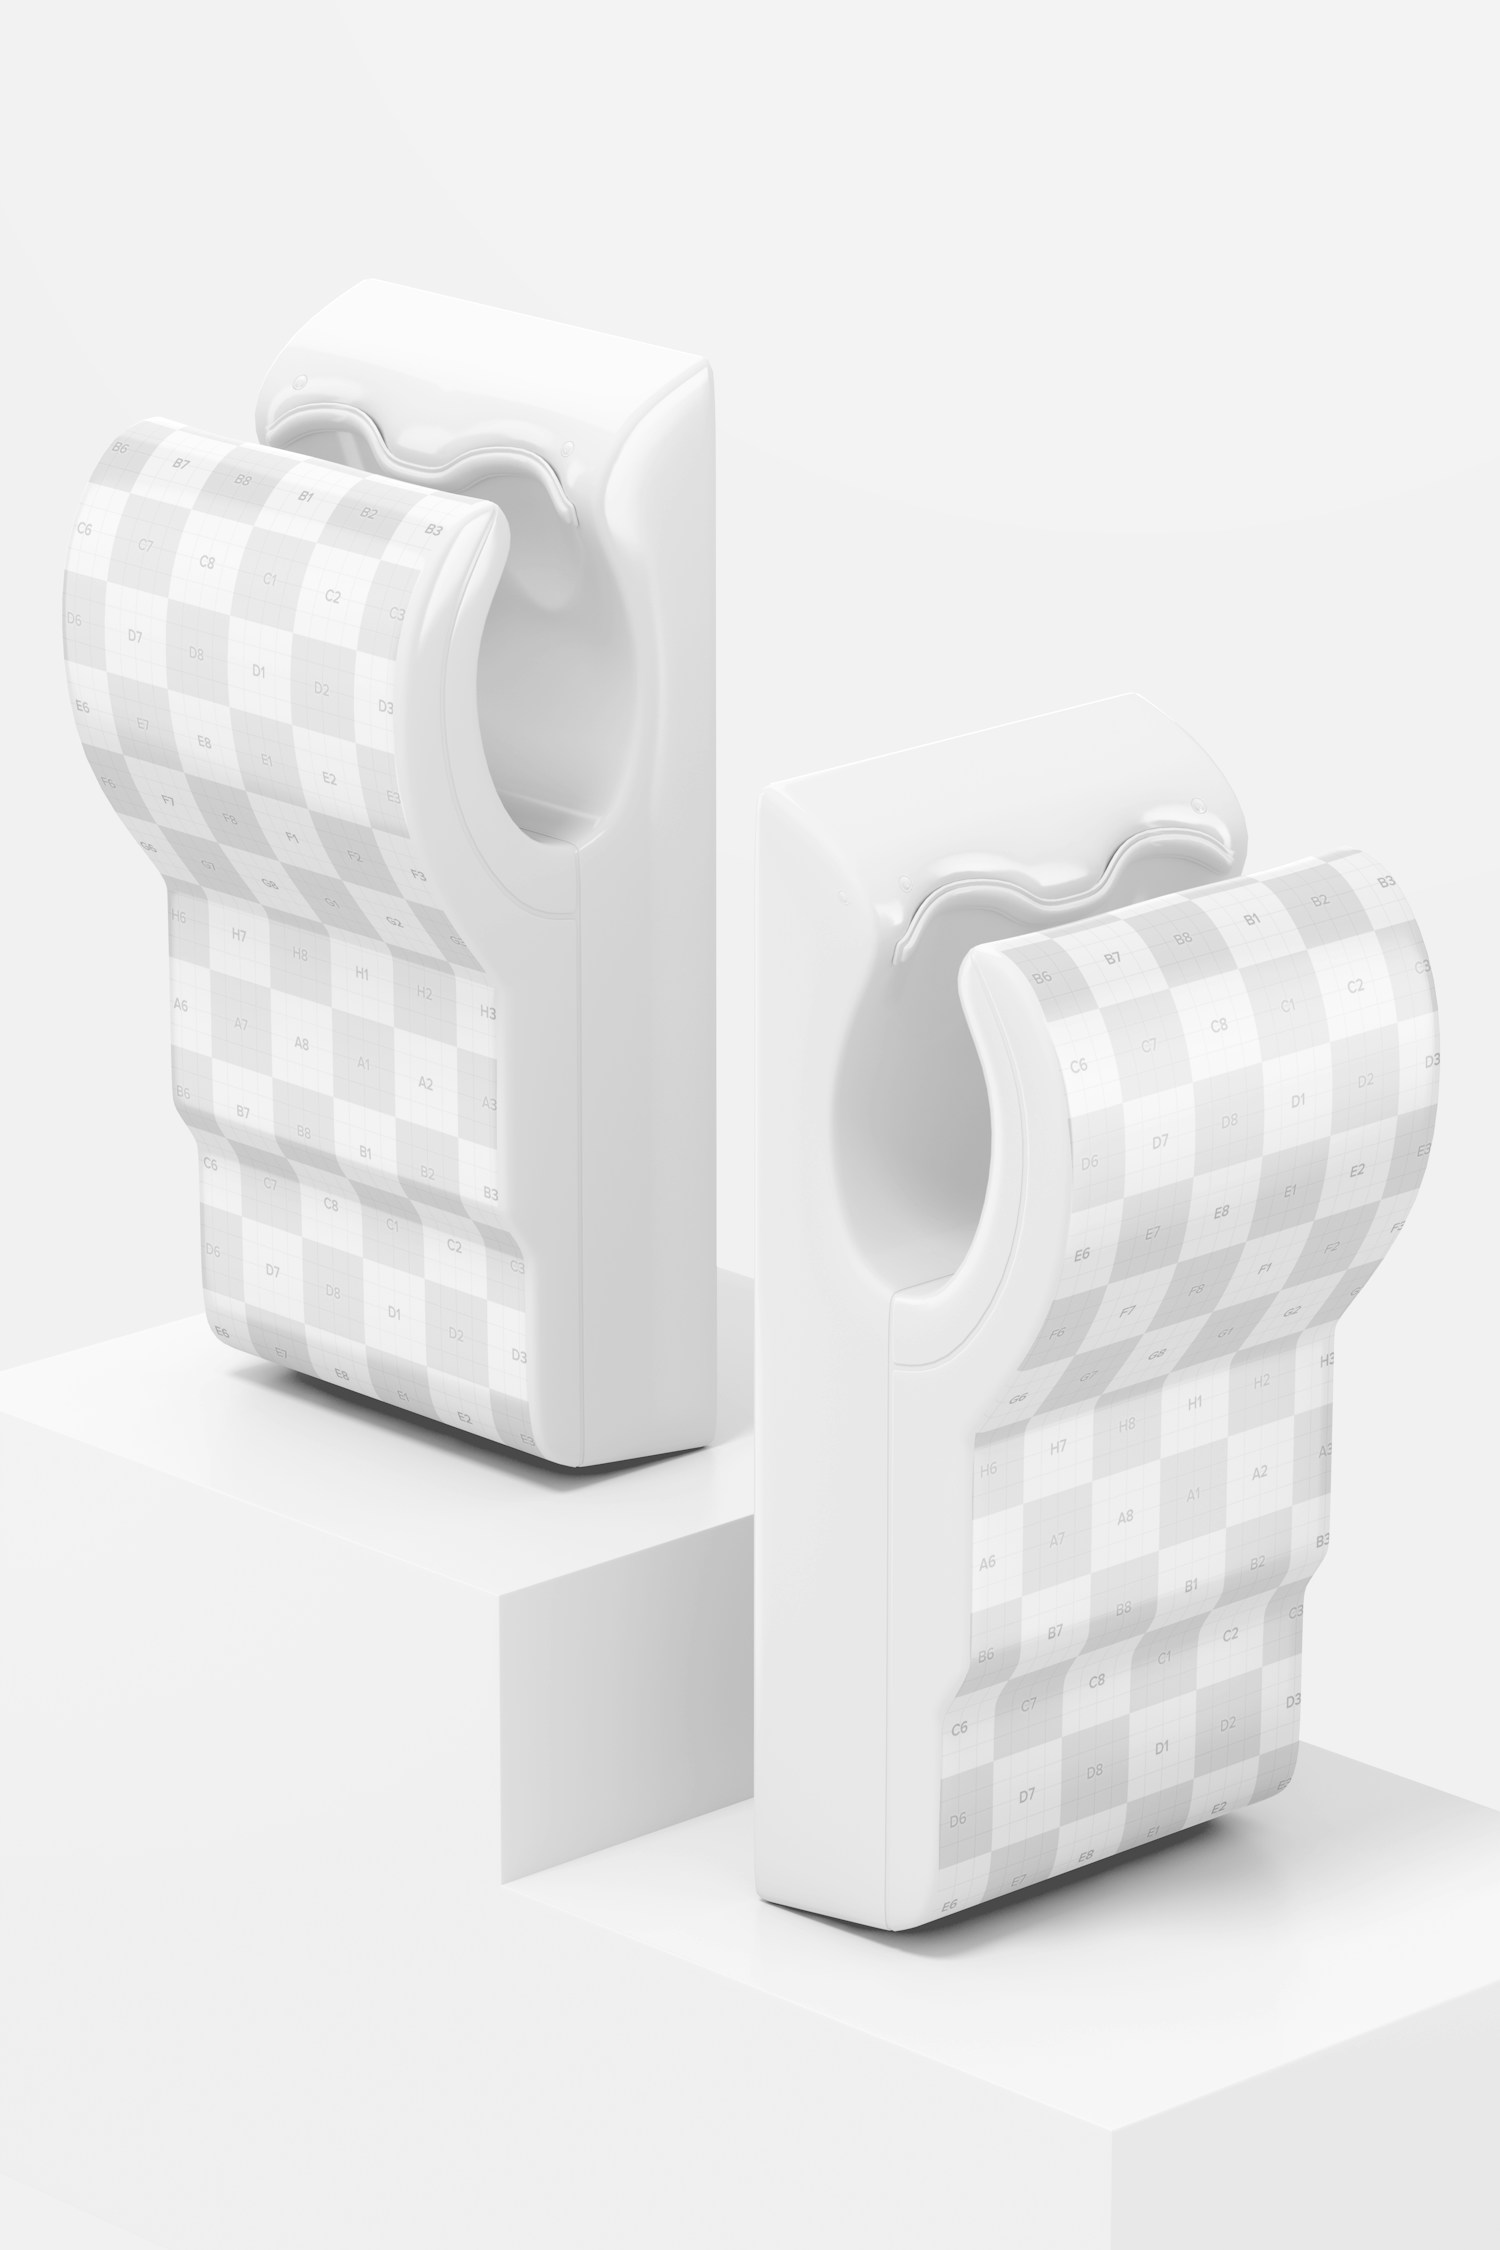 Hand Dryers Mockup, Left and Right View